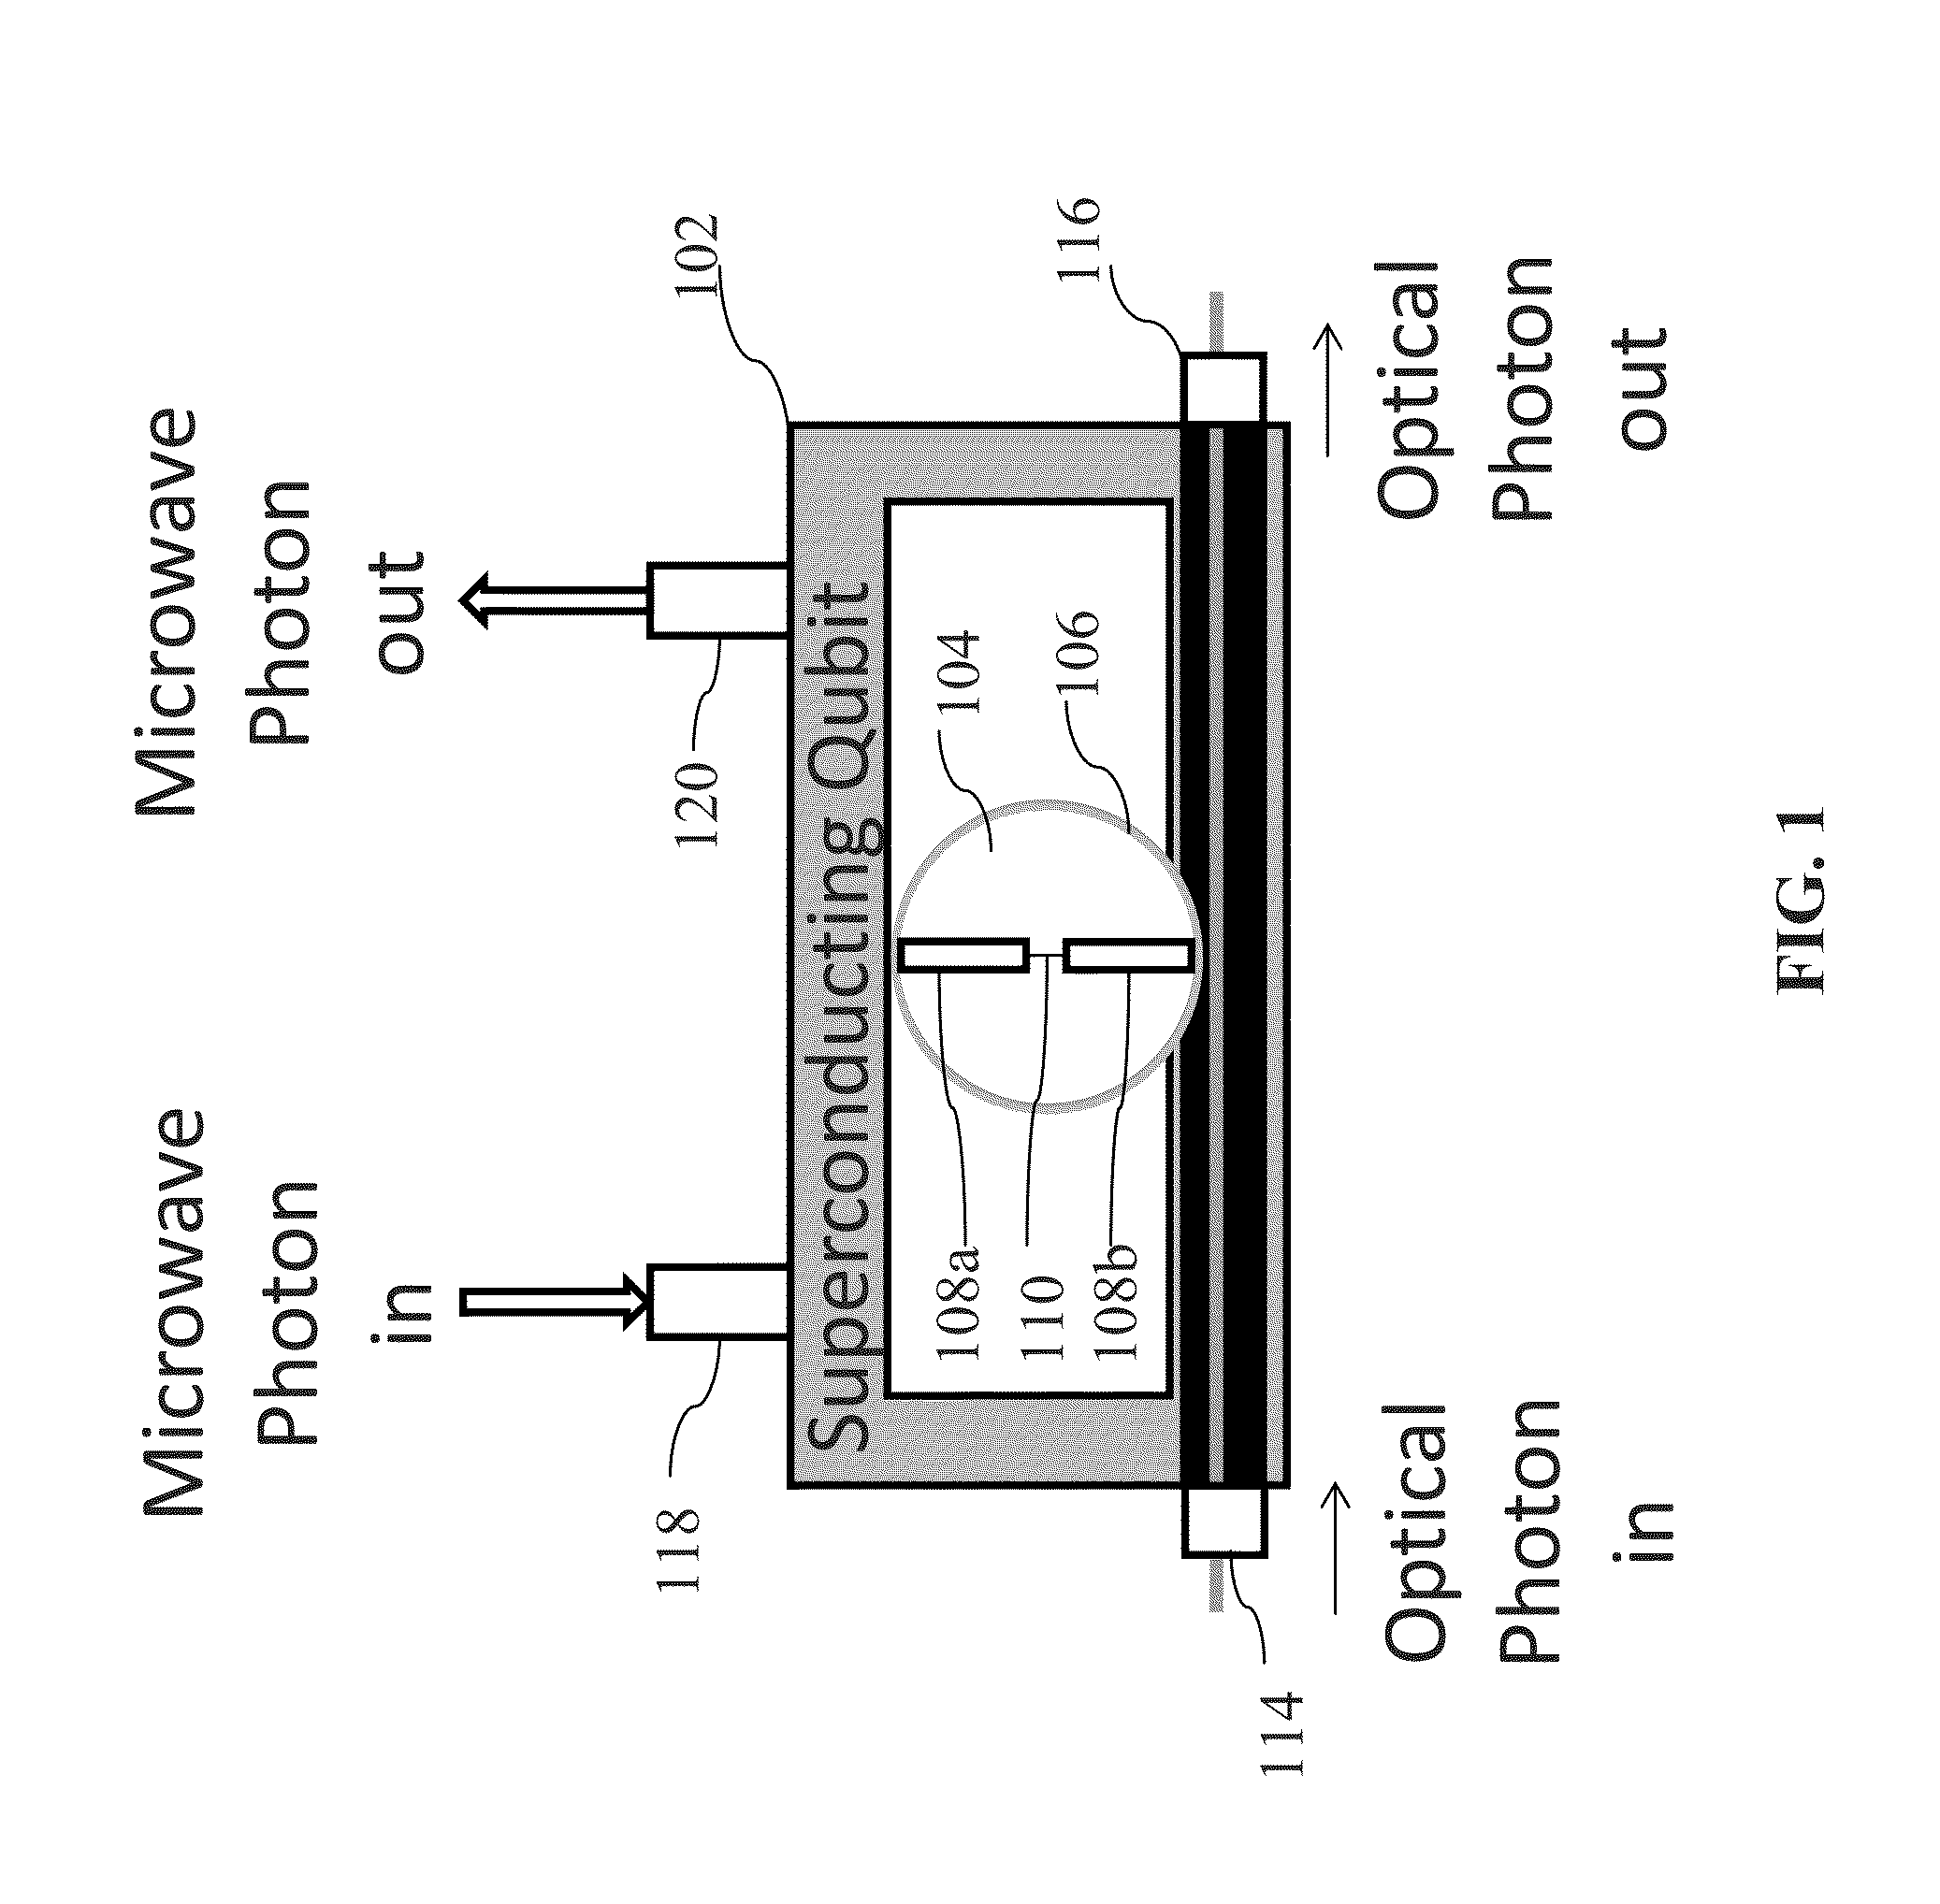 System and method for quantum information transfer between optical photons and superconductive qubits